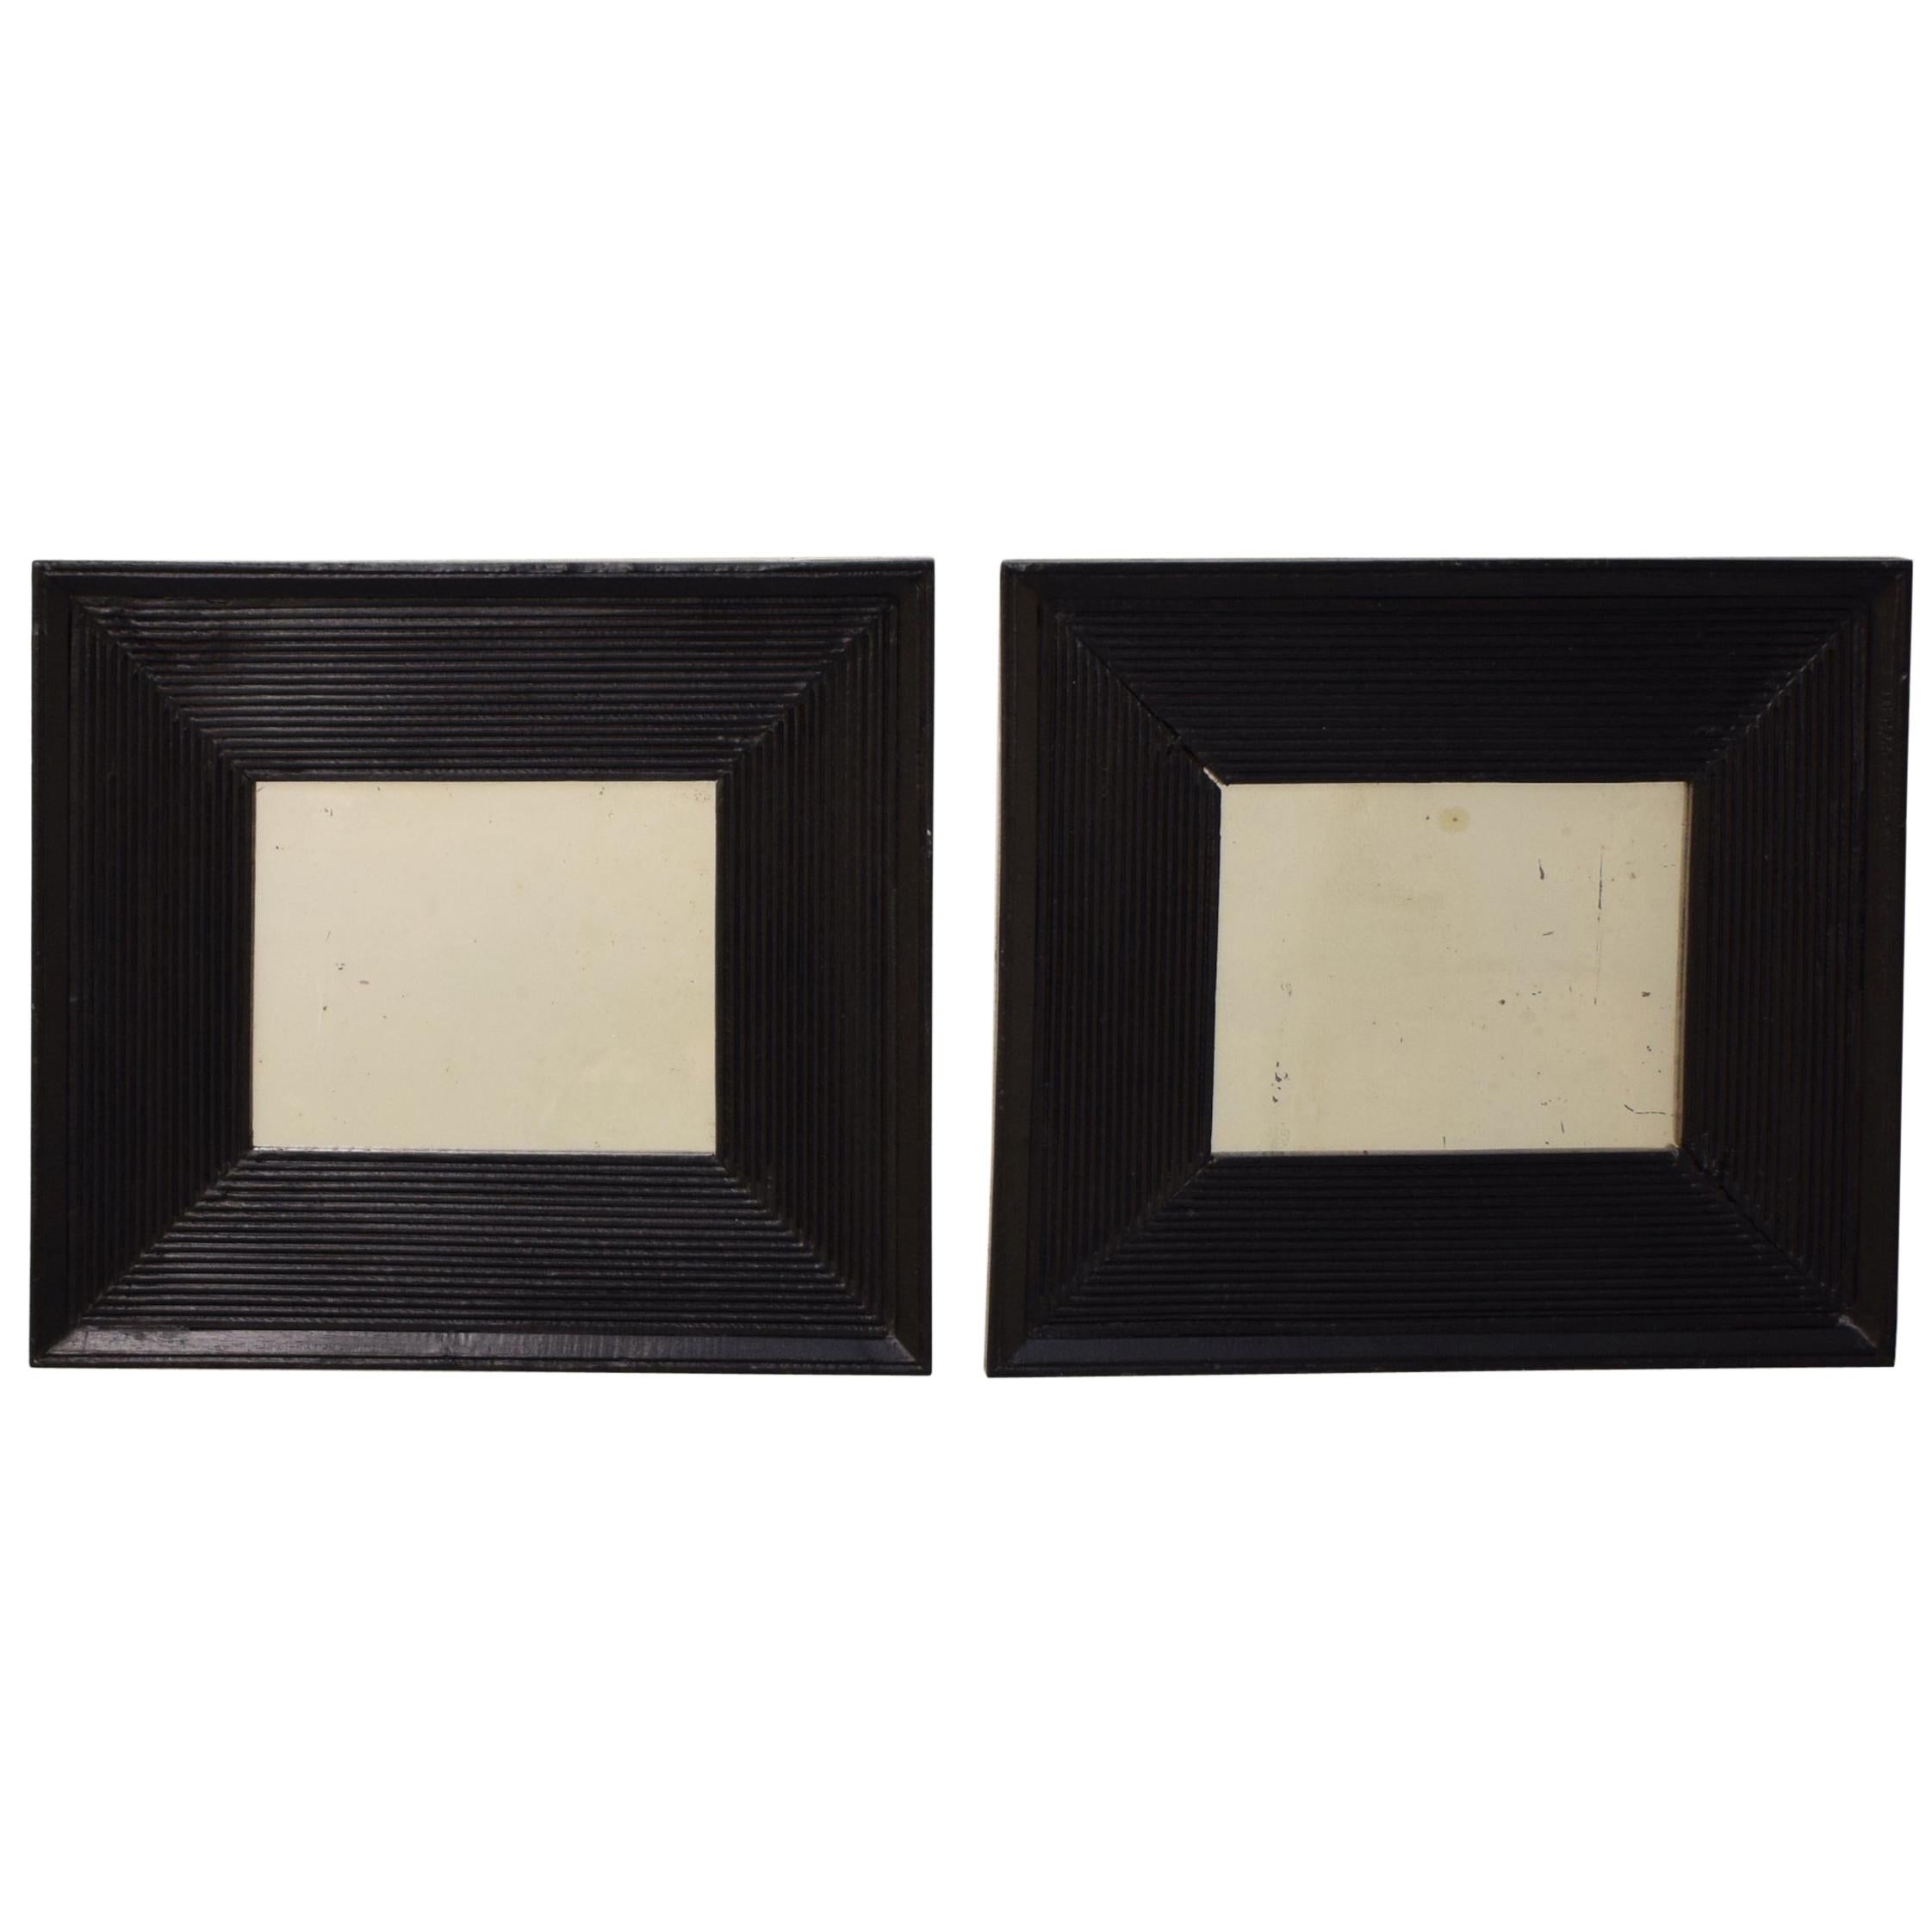 Small Pair of Black French Ebonized Mirrors with Old Mirror Glass, circa 1880